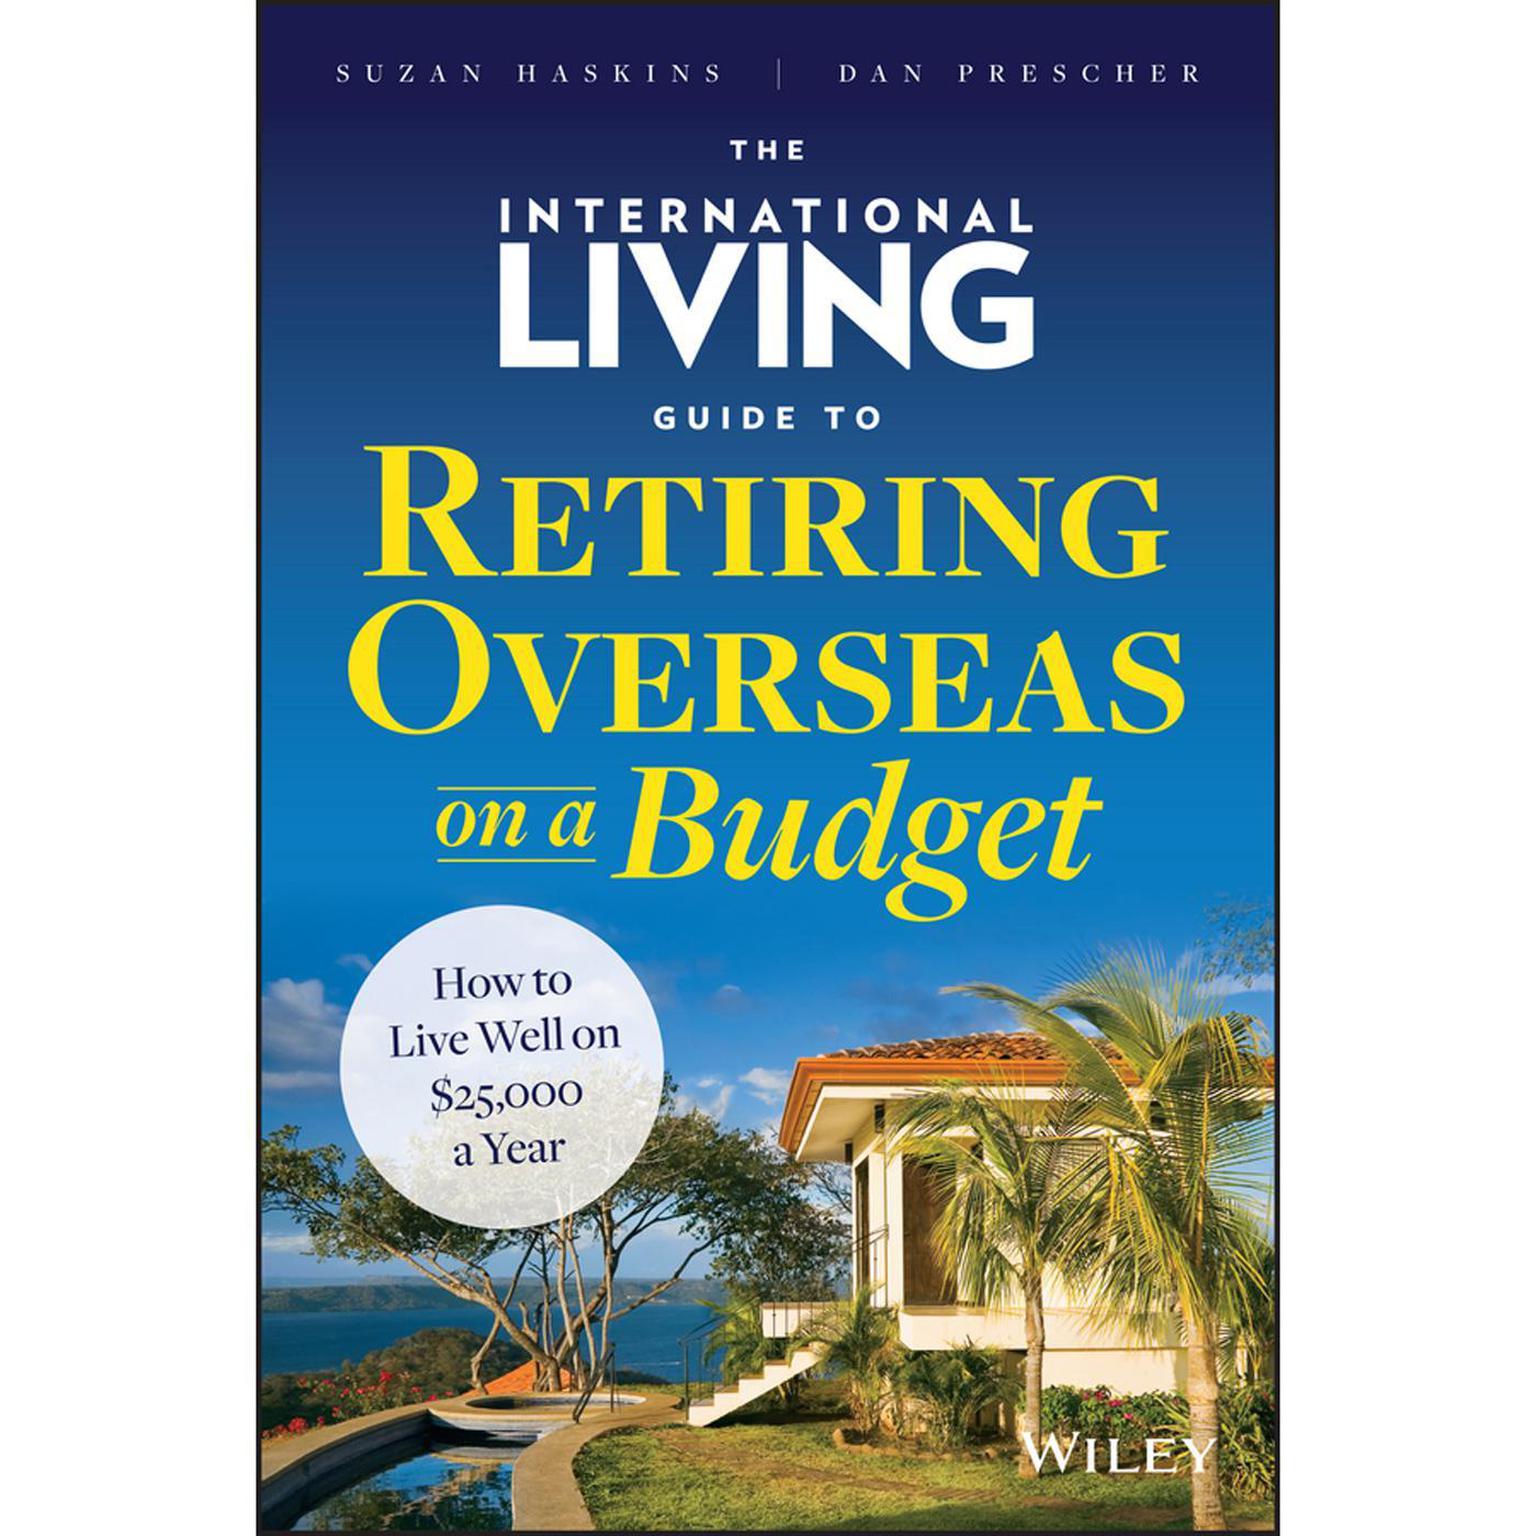 The International Living Guide to Retiring Overseas on a Budget: How to Live Well on $25,000 a Year Audiobook, by Dan Prescher